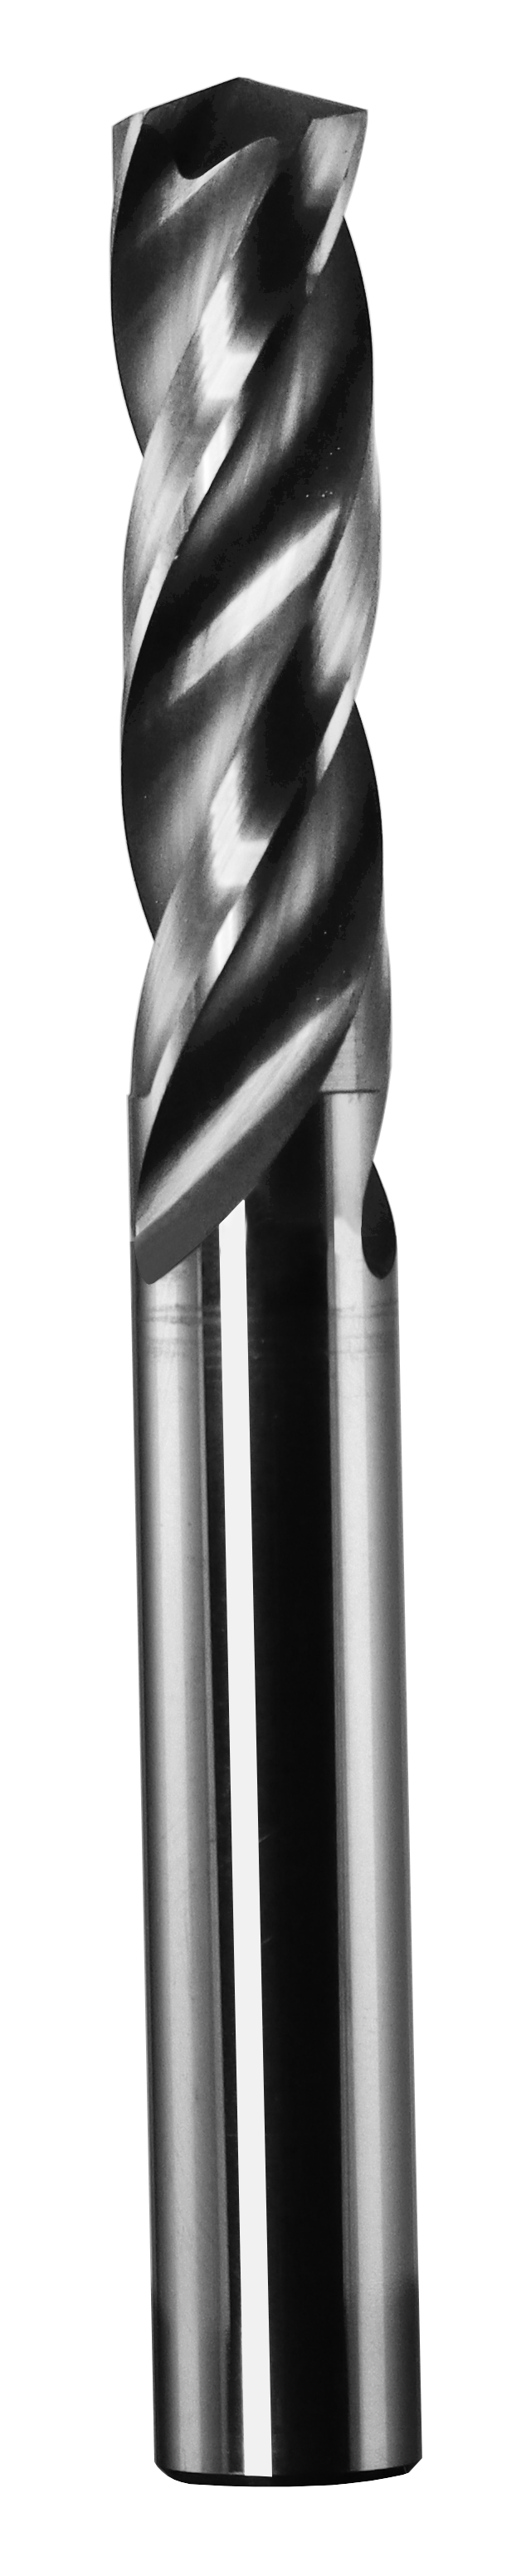 25/64" Dia, 150 Degree Point, Solid Carbide Drill - 53125